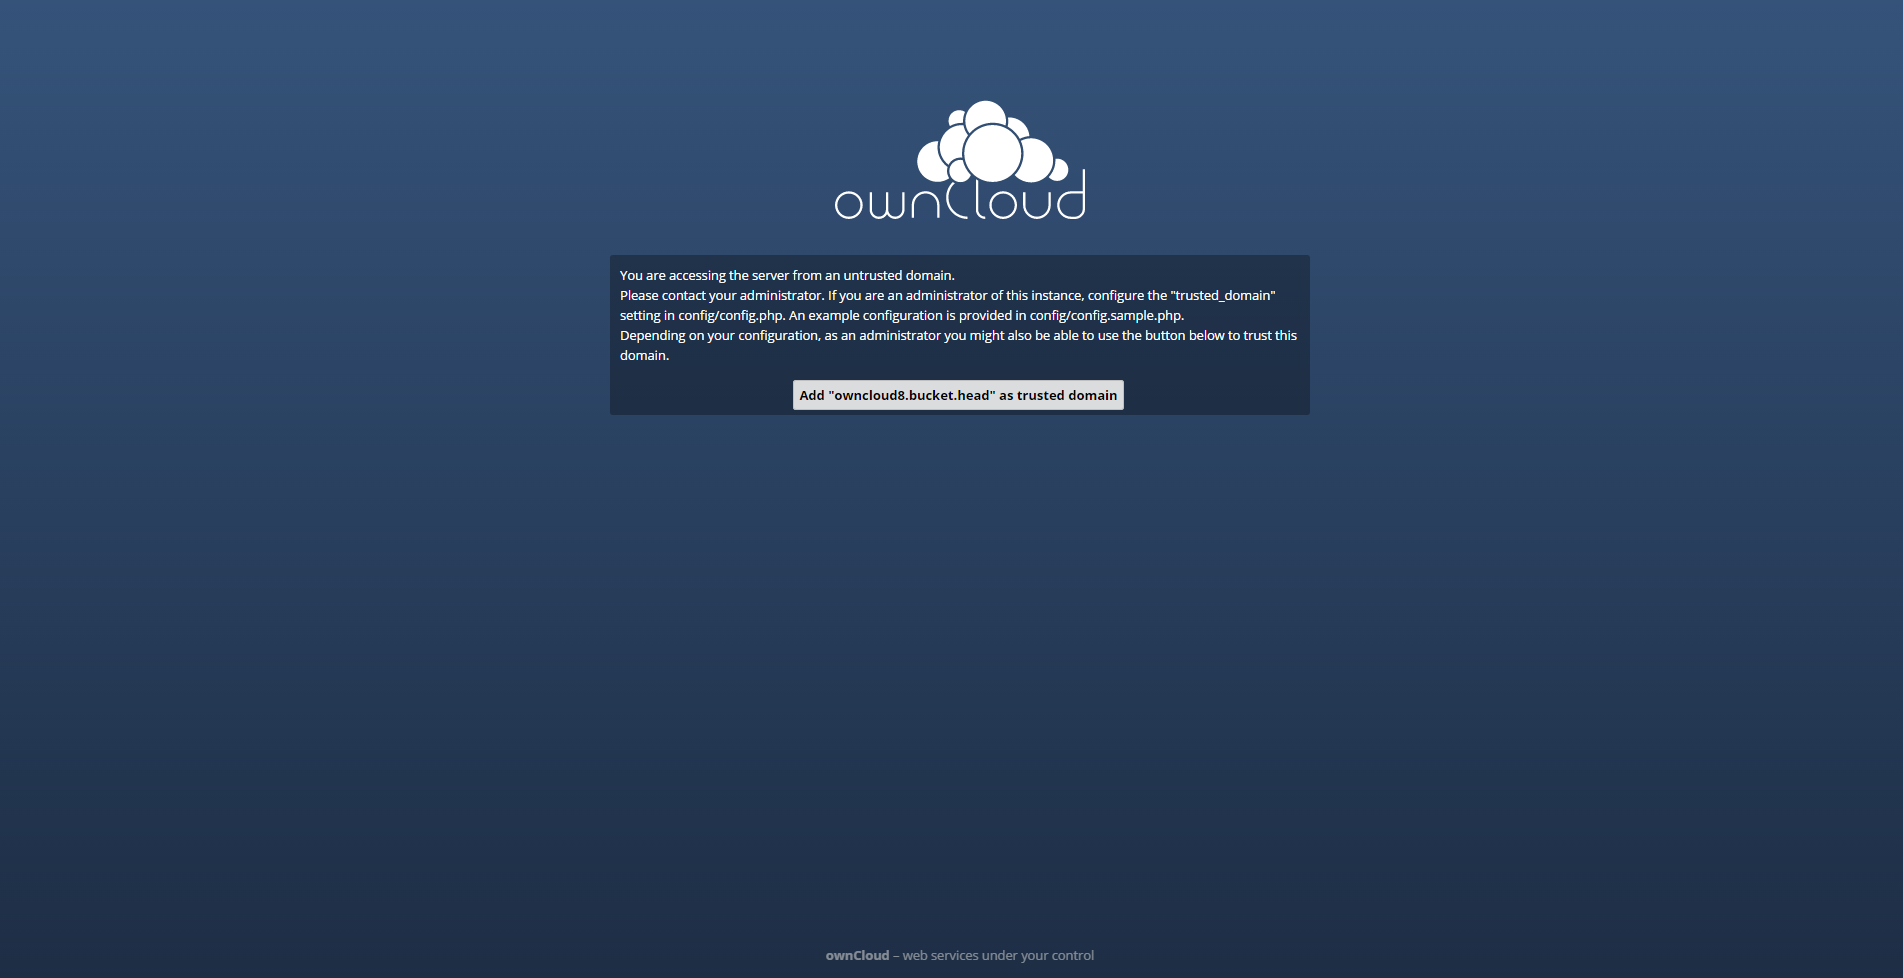 ownCloud.png